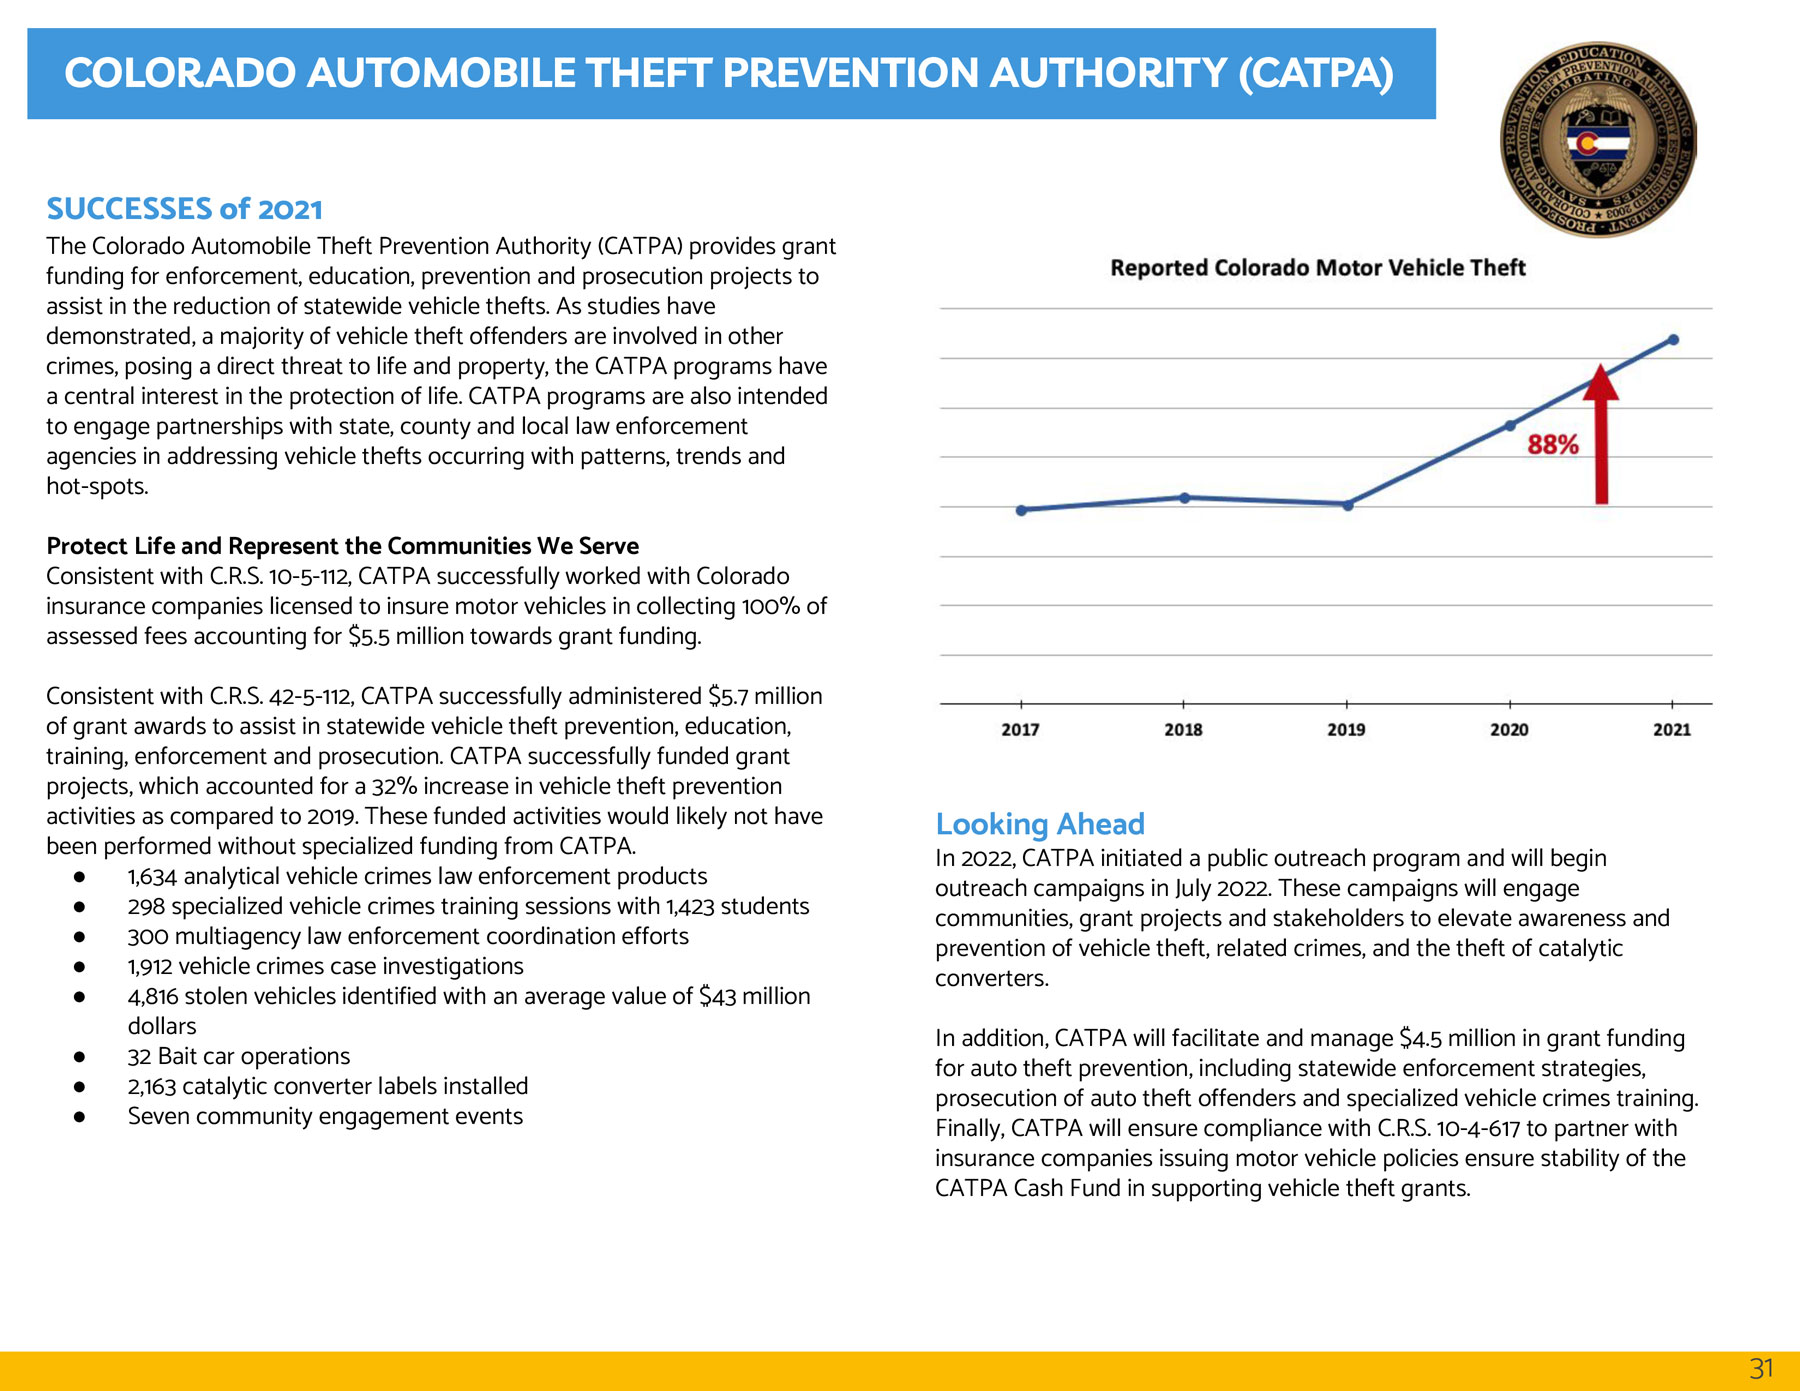 Photo of annual report cover sheet showing graphs of auto theft trends